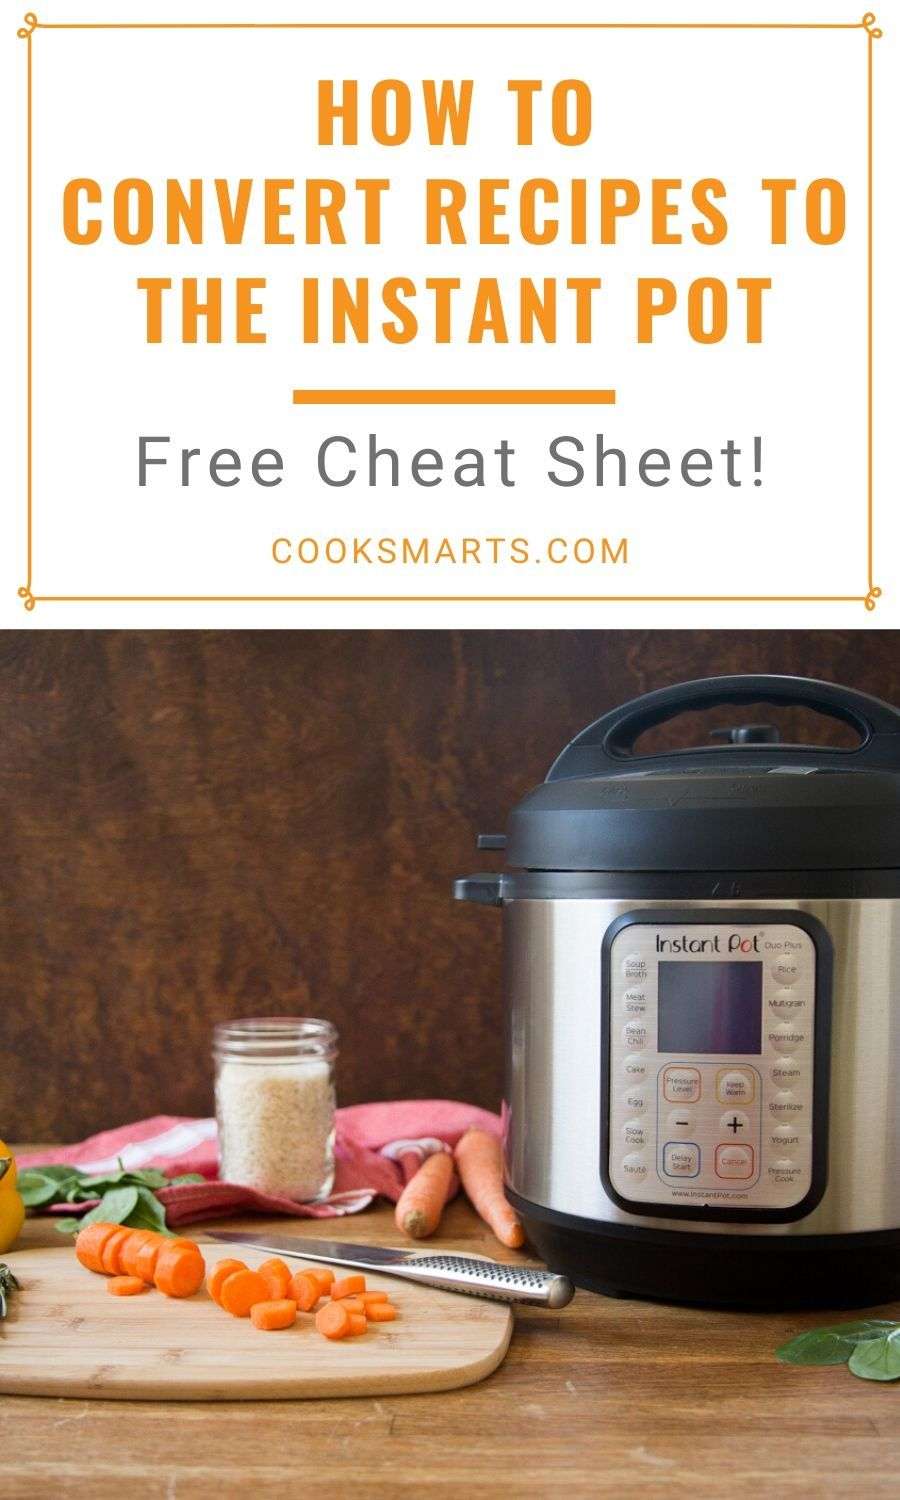 How to Convert Recipes to Instant Pot